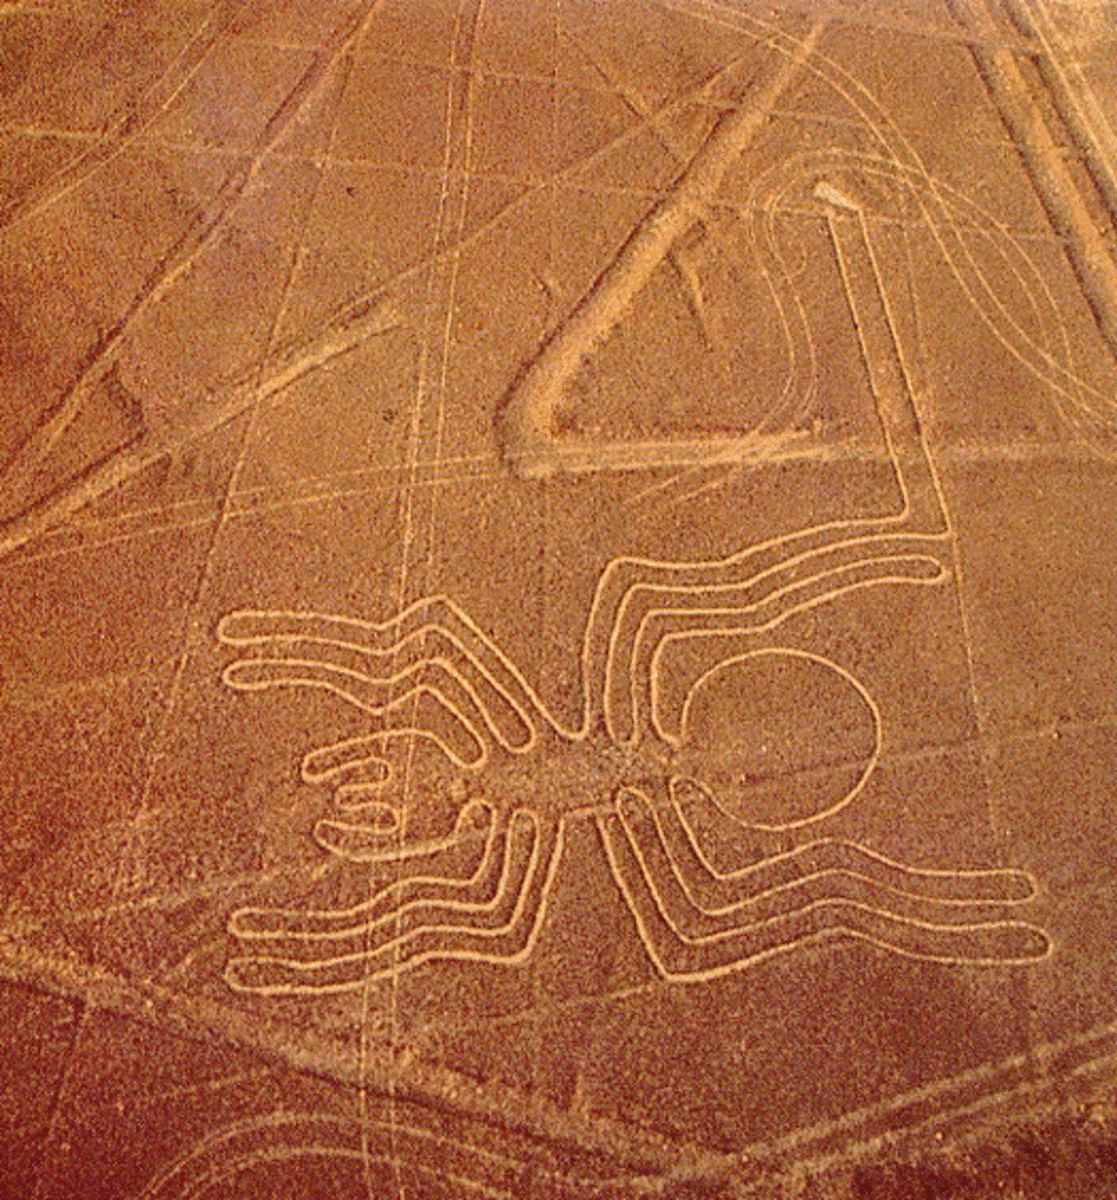 A spider geoglyph created by the Nazca people